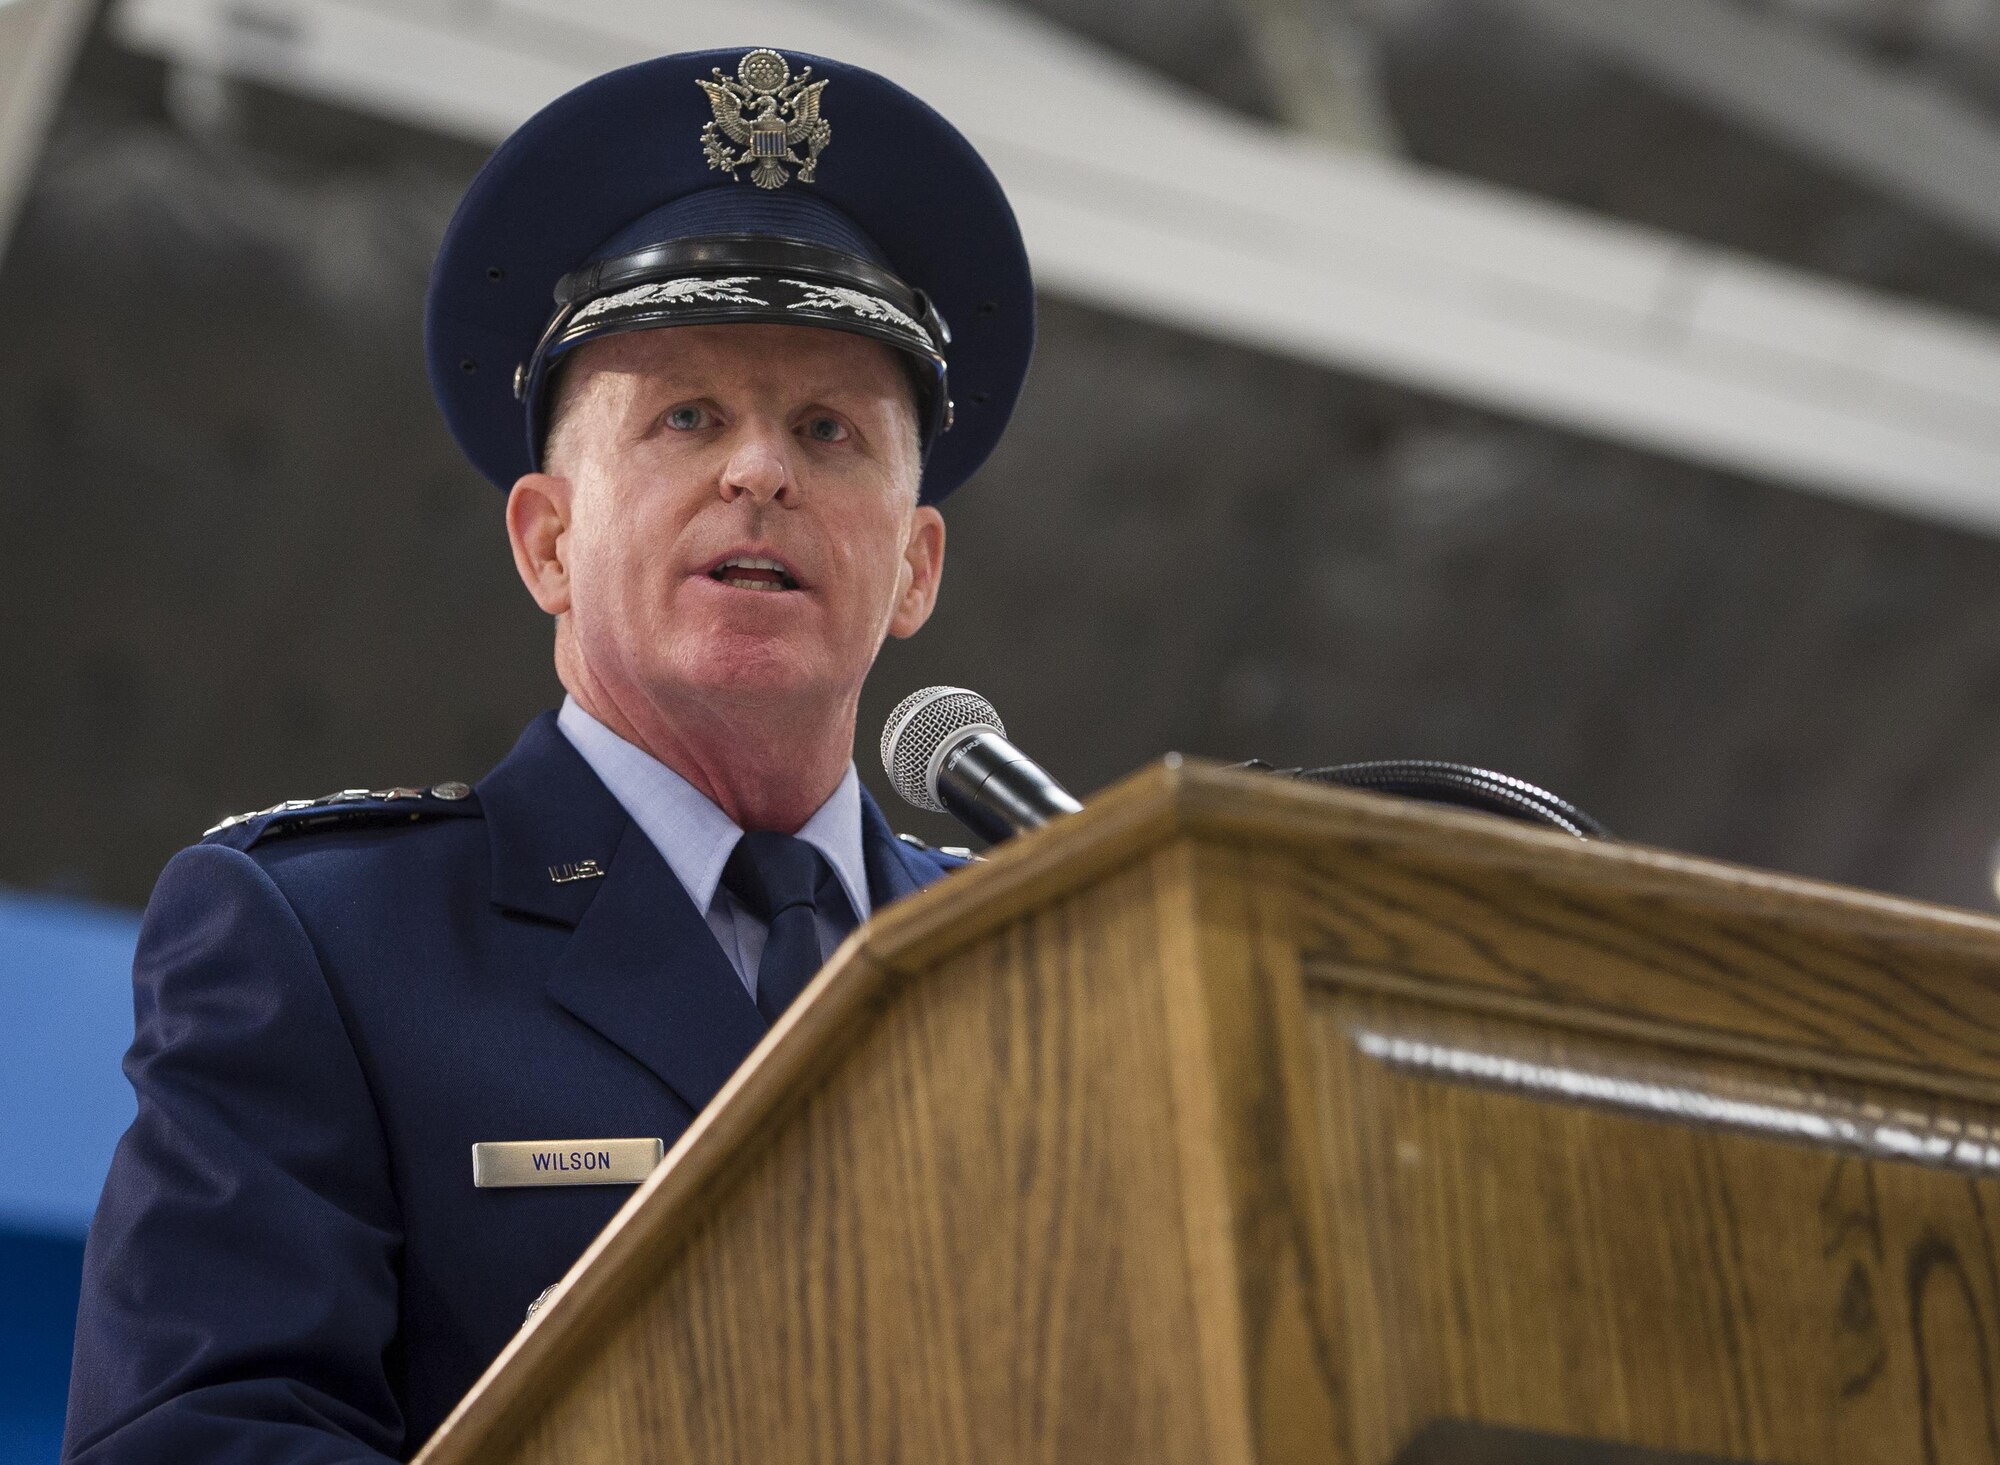 Air Force Vice Chief of Staff Gen. Stephen Wilson gives his remarks during the retirement ceremony for Maj. Gen. Darryl Burke on Joint Base Andrews, Md. June 20, 2017. Wilson concurrently presided over the Air Force District of Washington Change of Command where Burke relinquished command to Maj. Gen. James Jacobson. (U.S. Air Force photo/Jim Varhegyi)(released)